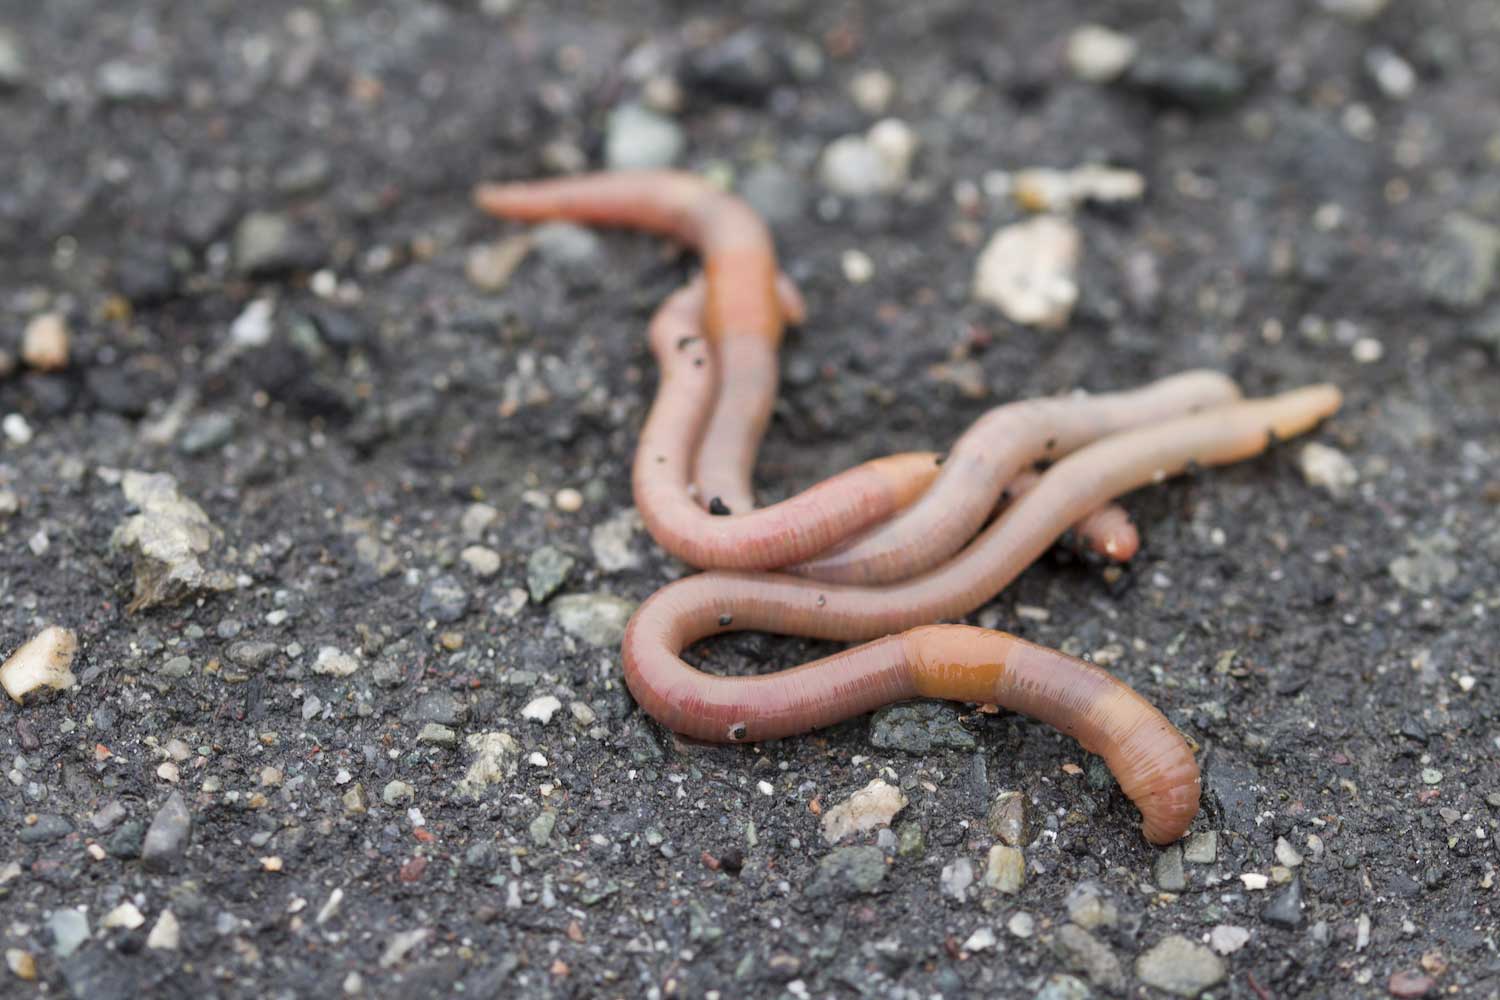 Earthworms Aren't as Good for the Soil as You Think